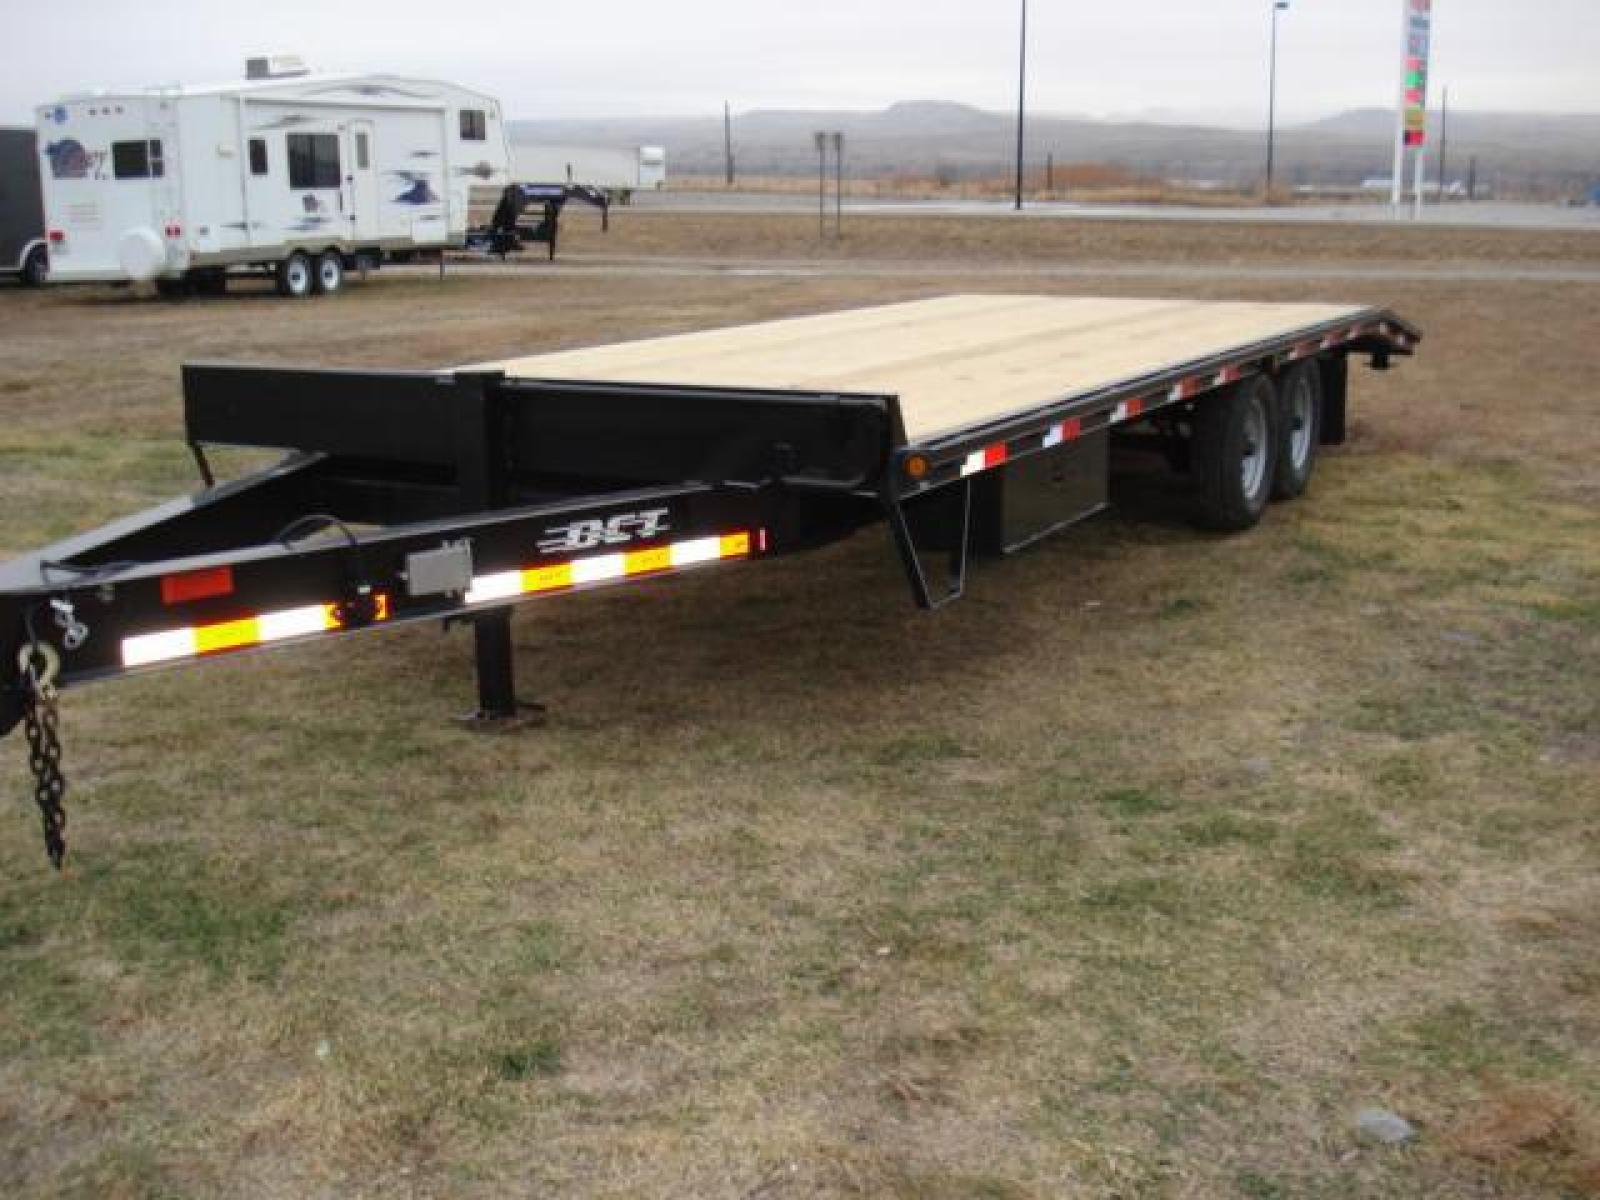 2022 Black DCT 81/2 x 20 + 4 Deckover Equip , located at 310 West 1st Ave, Big Timber, MT, 59011, (406) 860-8510, 45.833511, -109.957809 - DCT 81/2 X 20 + 4 DECKOVER BUMPER-PULL EQUIPMENT TRAILER, 4' DOVETAIL, 14K GVW, 2 - 7K AXLES W- EZ LUBE HUBS, HD SLIPPER SPRING SUSPENSION, 16"-10 PLY TIRES, 16" ON CENTER CROSS MEMBERS, LED LIGHTS, TREATED DECK, REAR RAMPS, 2-5-16 ADJUSTABLE COUPLER, 12K DROP FOOT JACK, STAKE POCKETS-RUB RAIL. T - Photo #3